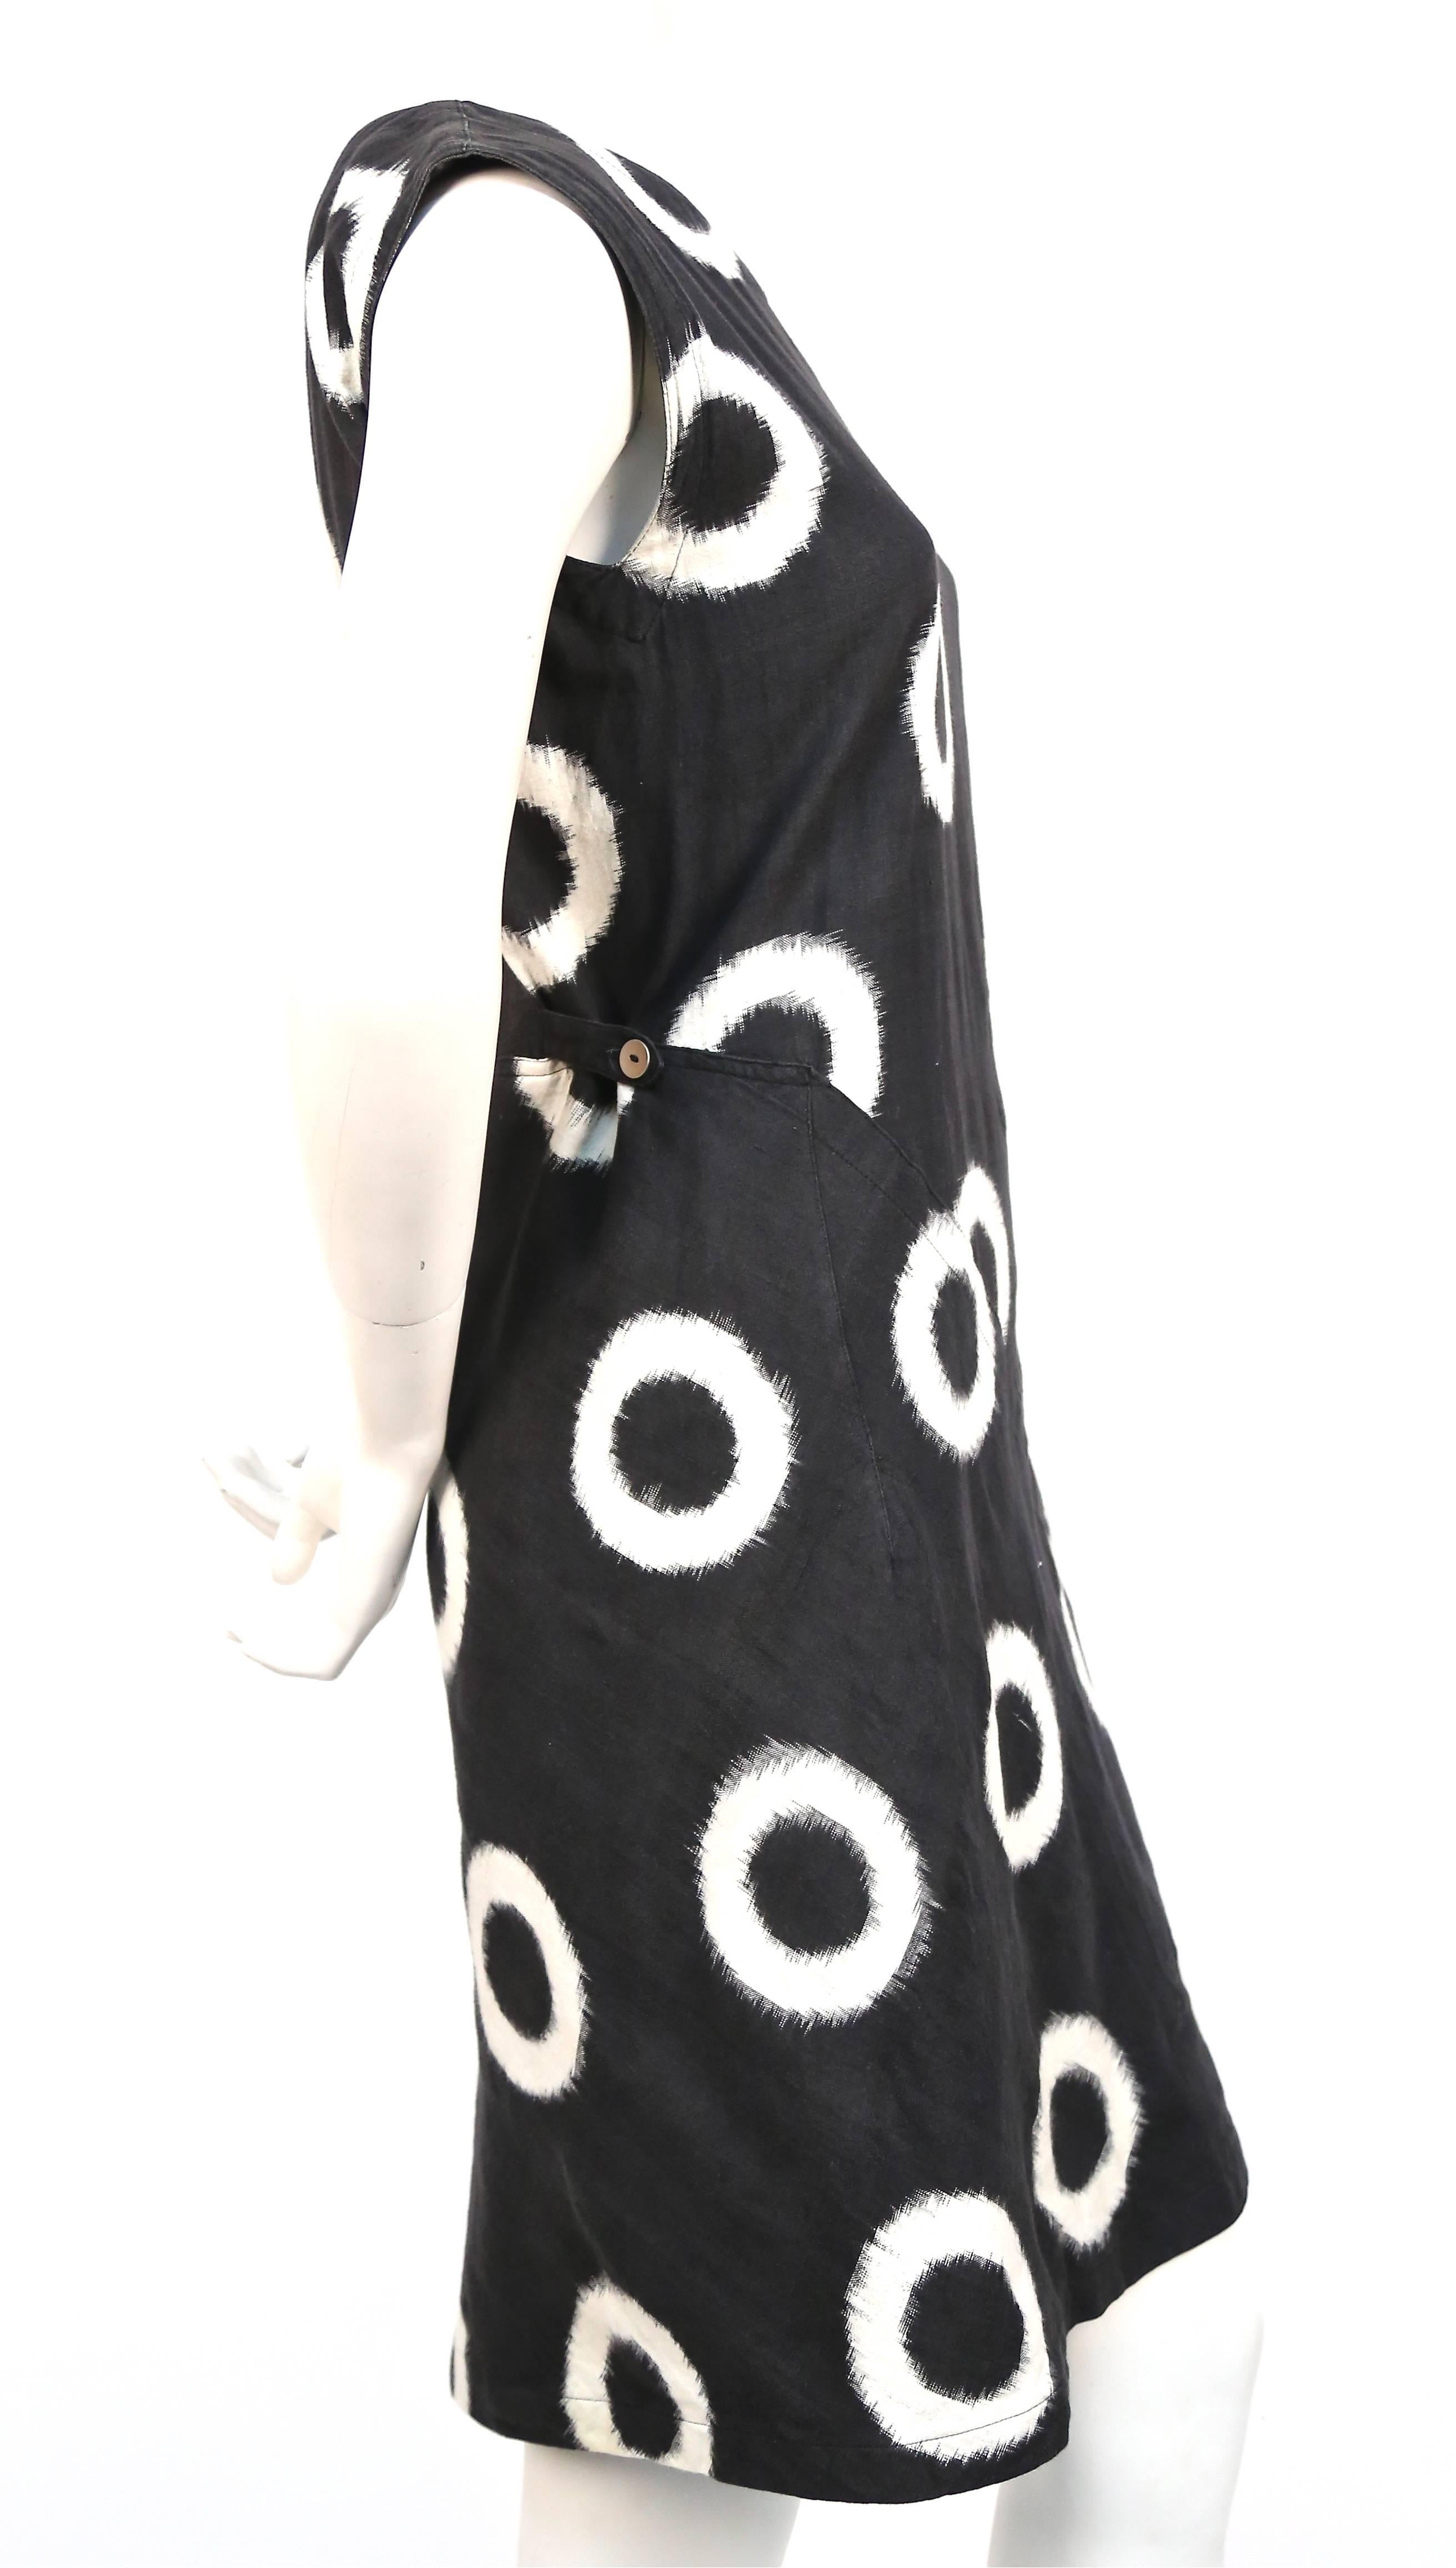 Soft black and off-white circular Ikat printed cotton dress from Issey Miyake dating to 1986.  Fits a size S or possibly a size M. Approximate measurements are: bust 35